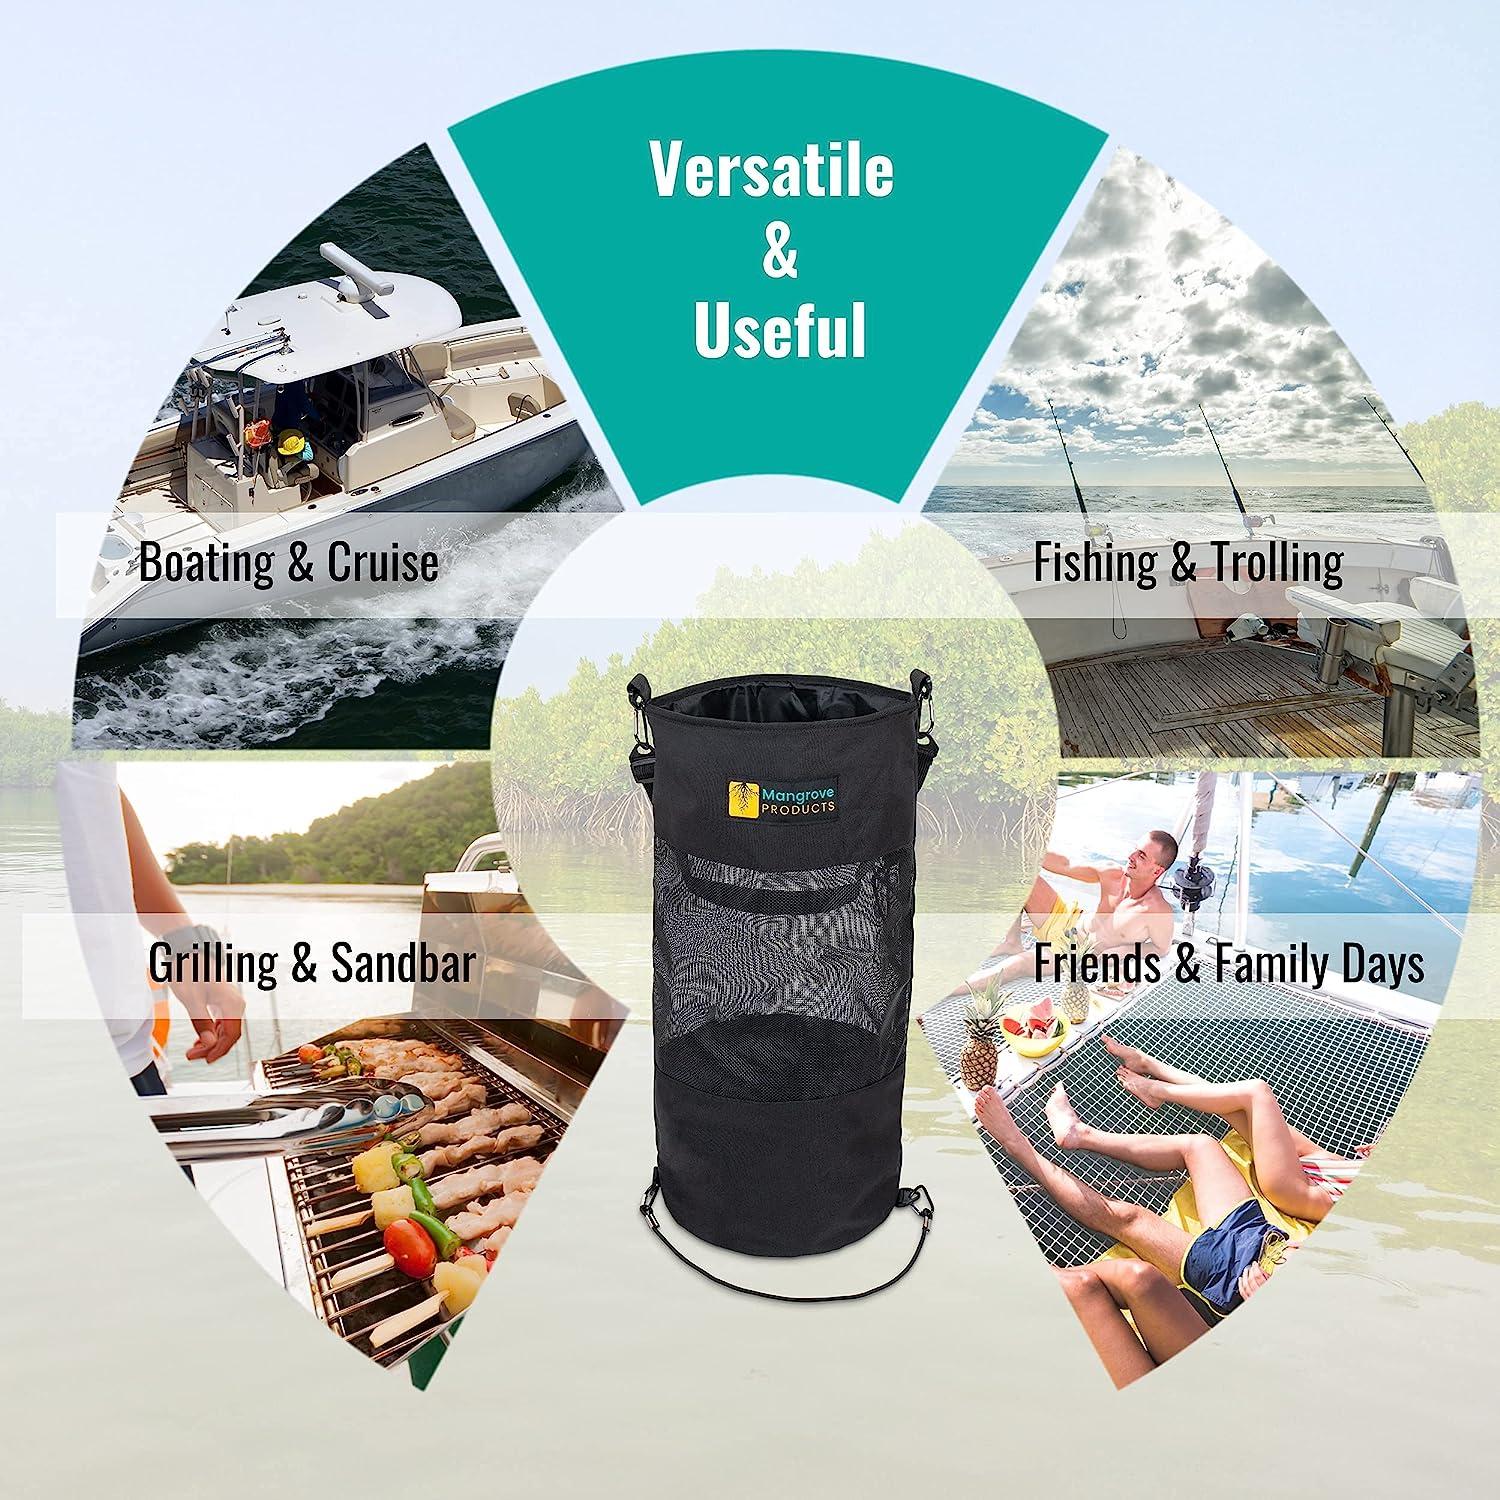  Mangrove Products: Portable Boat Trash Can